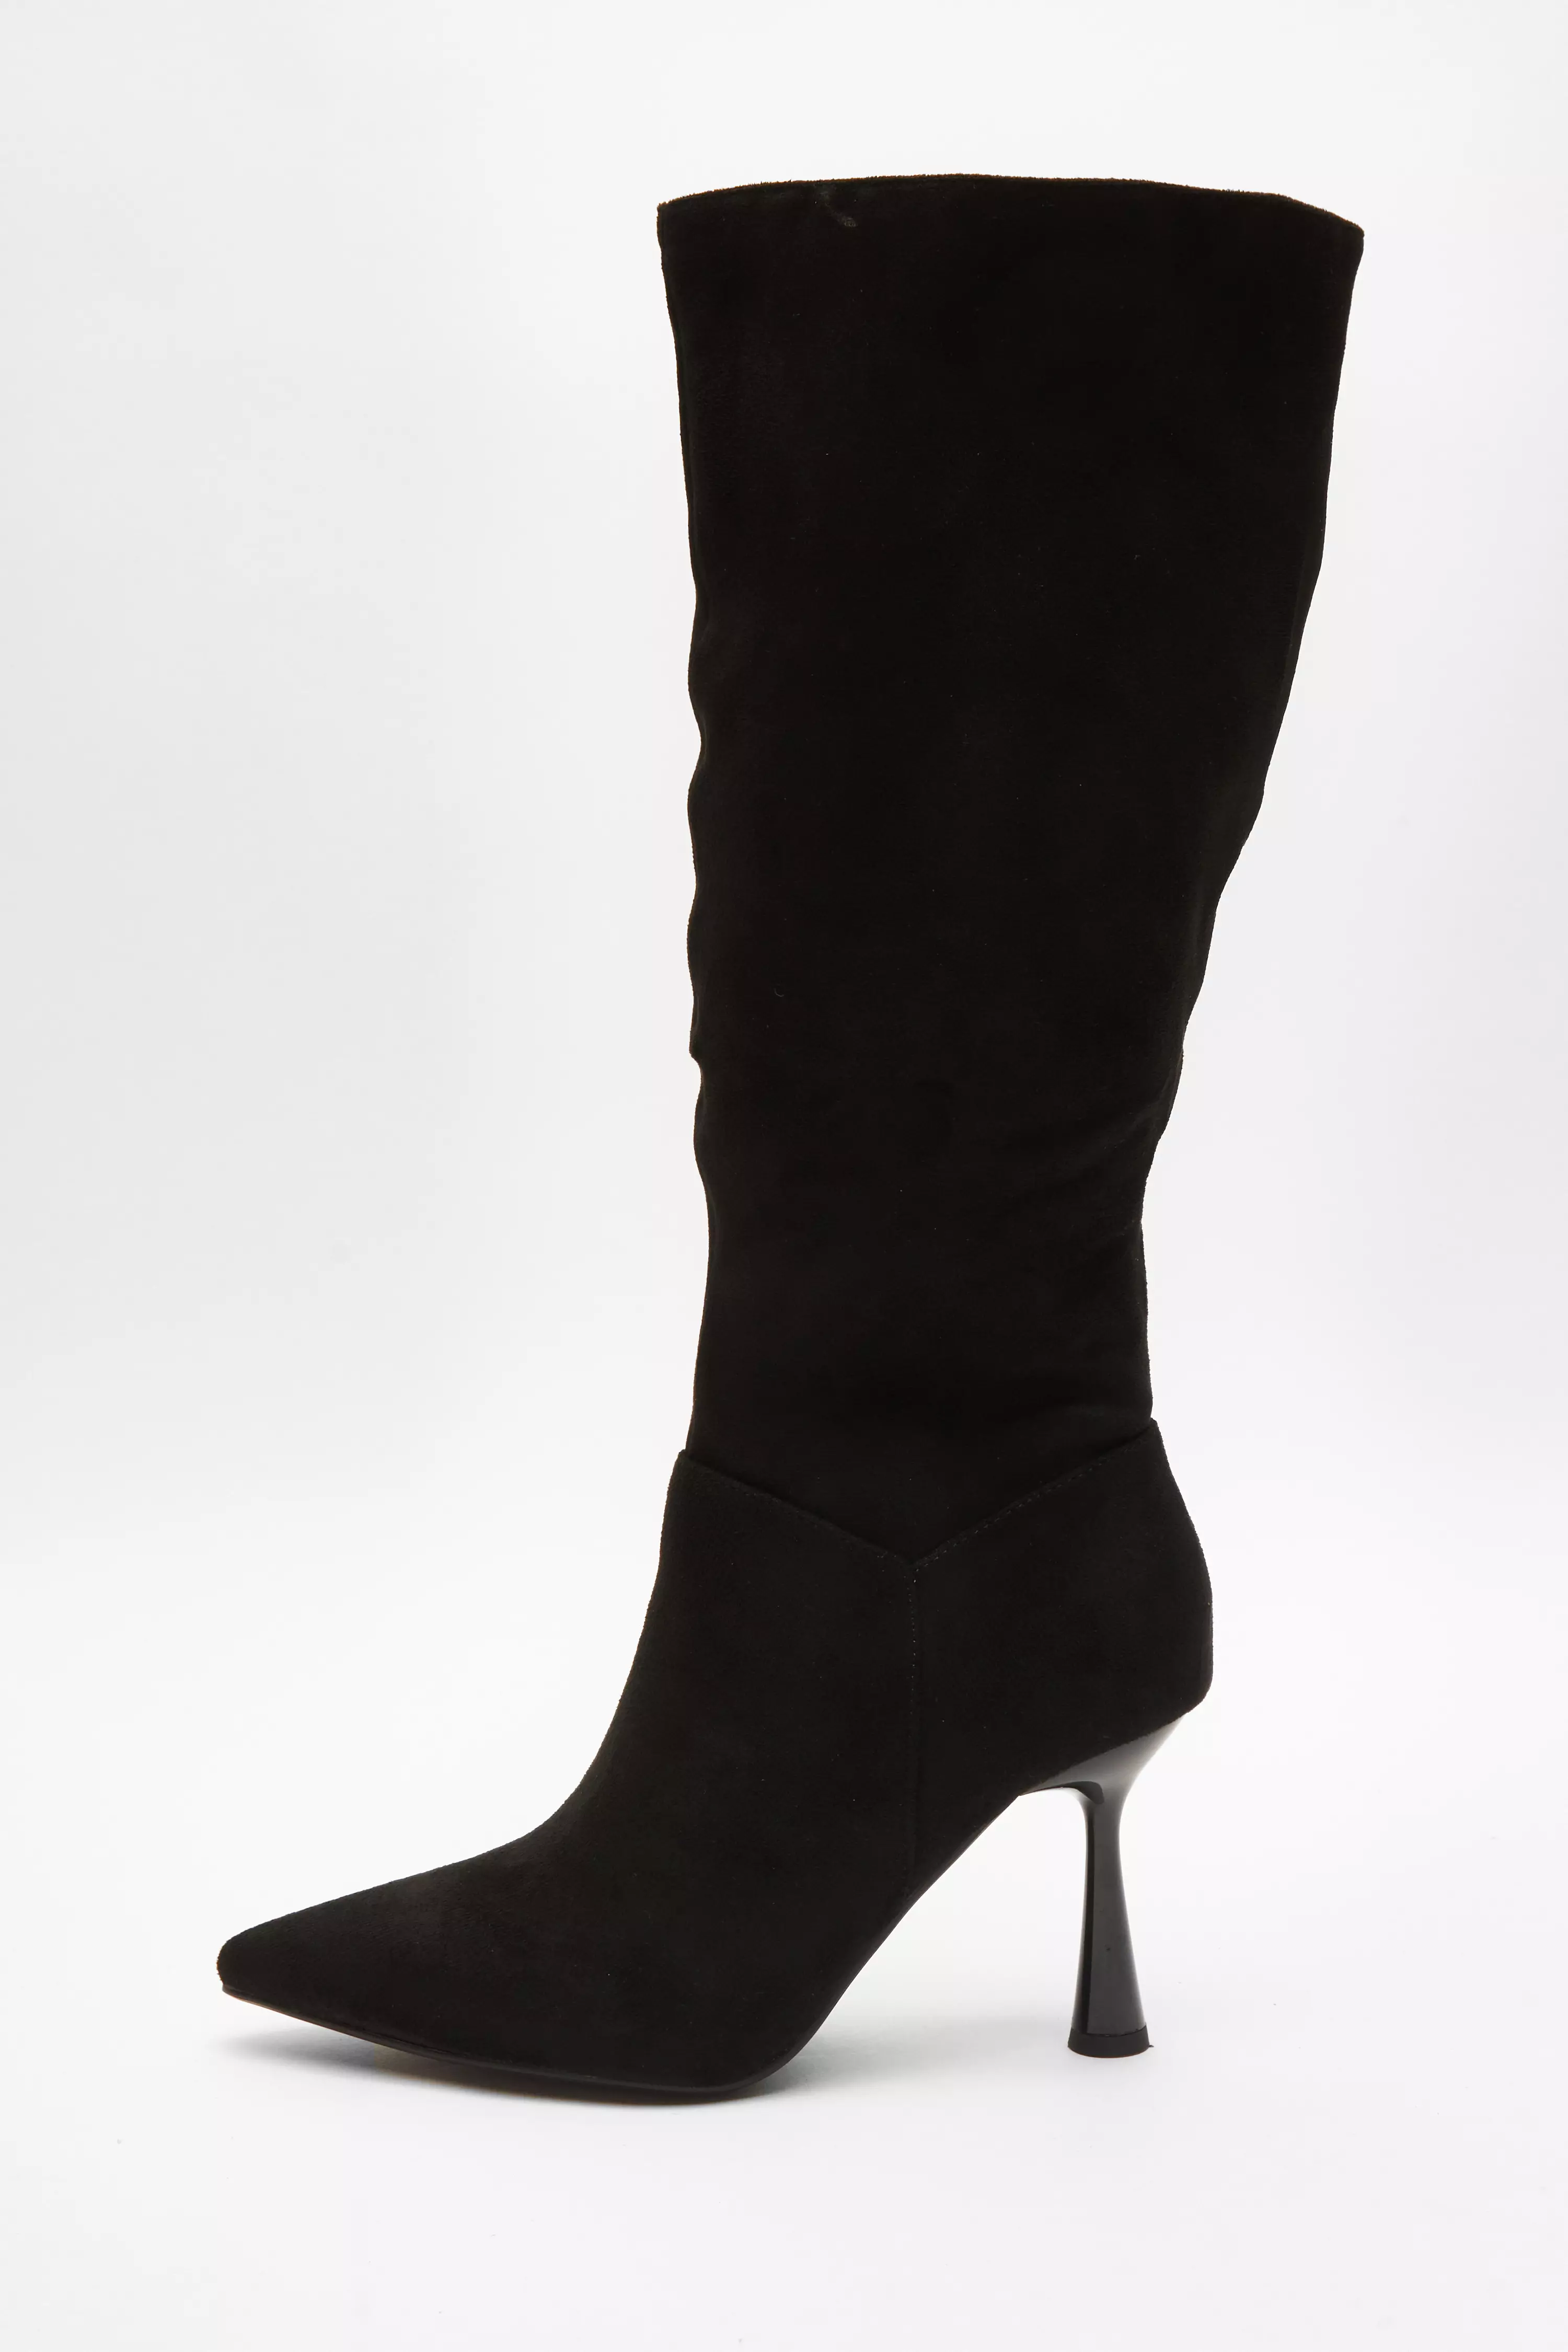 Black Faux Suede Knee High Heeled Boots - QUIZ Clothing